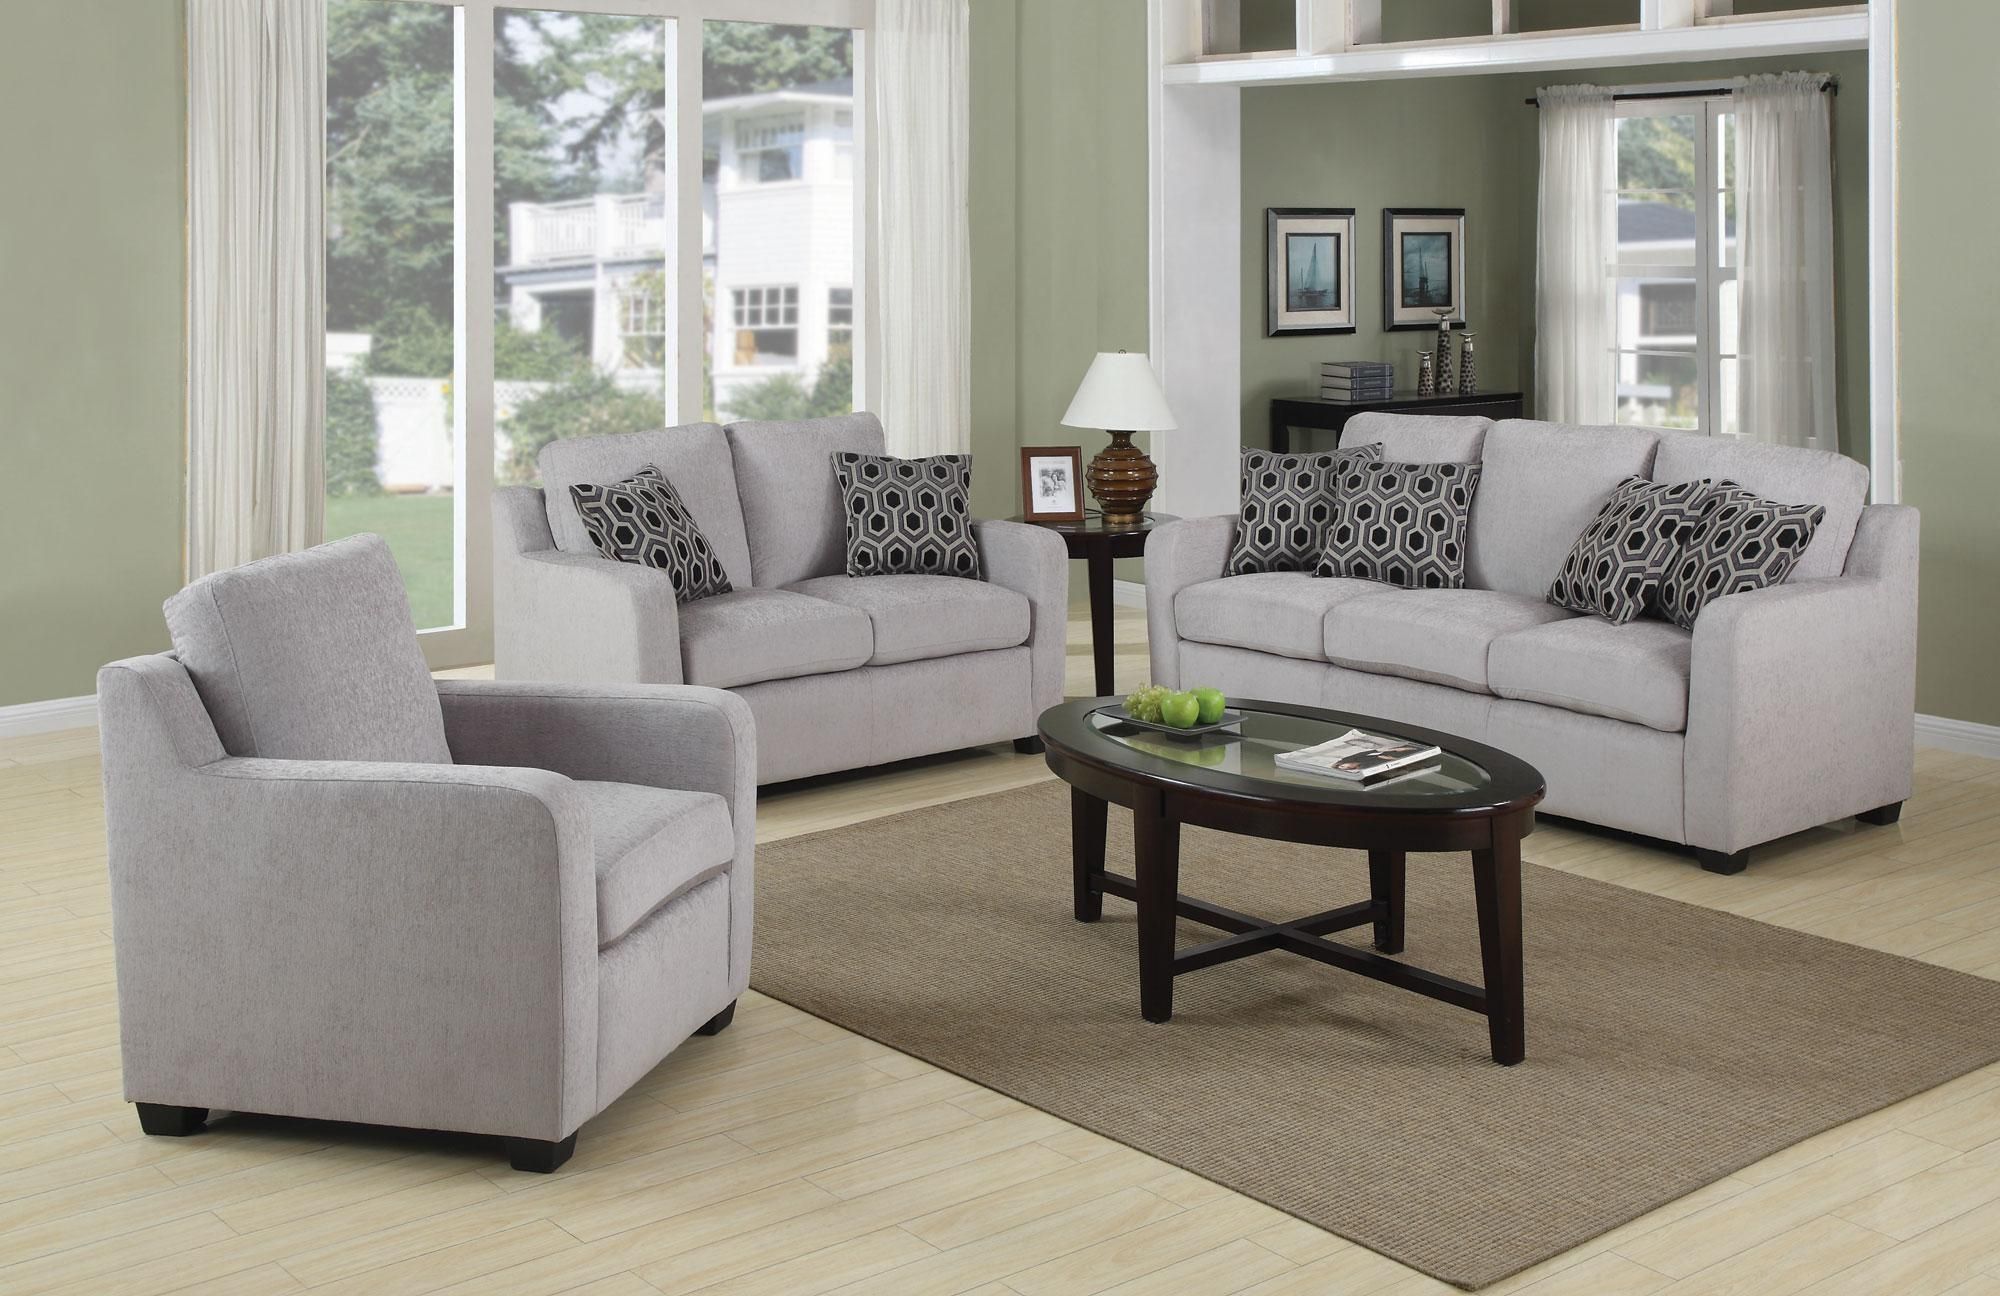 Furniture: Amazing Set Of Chairs For Living Room Cheap Couches Within Living Room Sofa And Chair Sets (View 1 of 20)